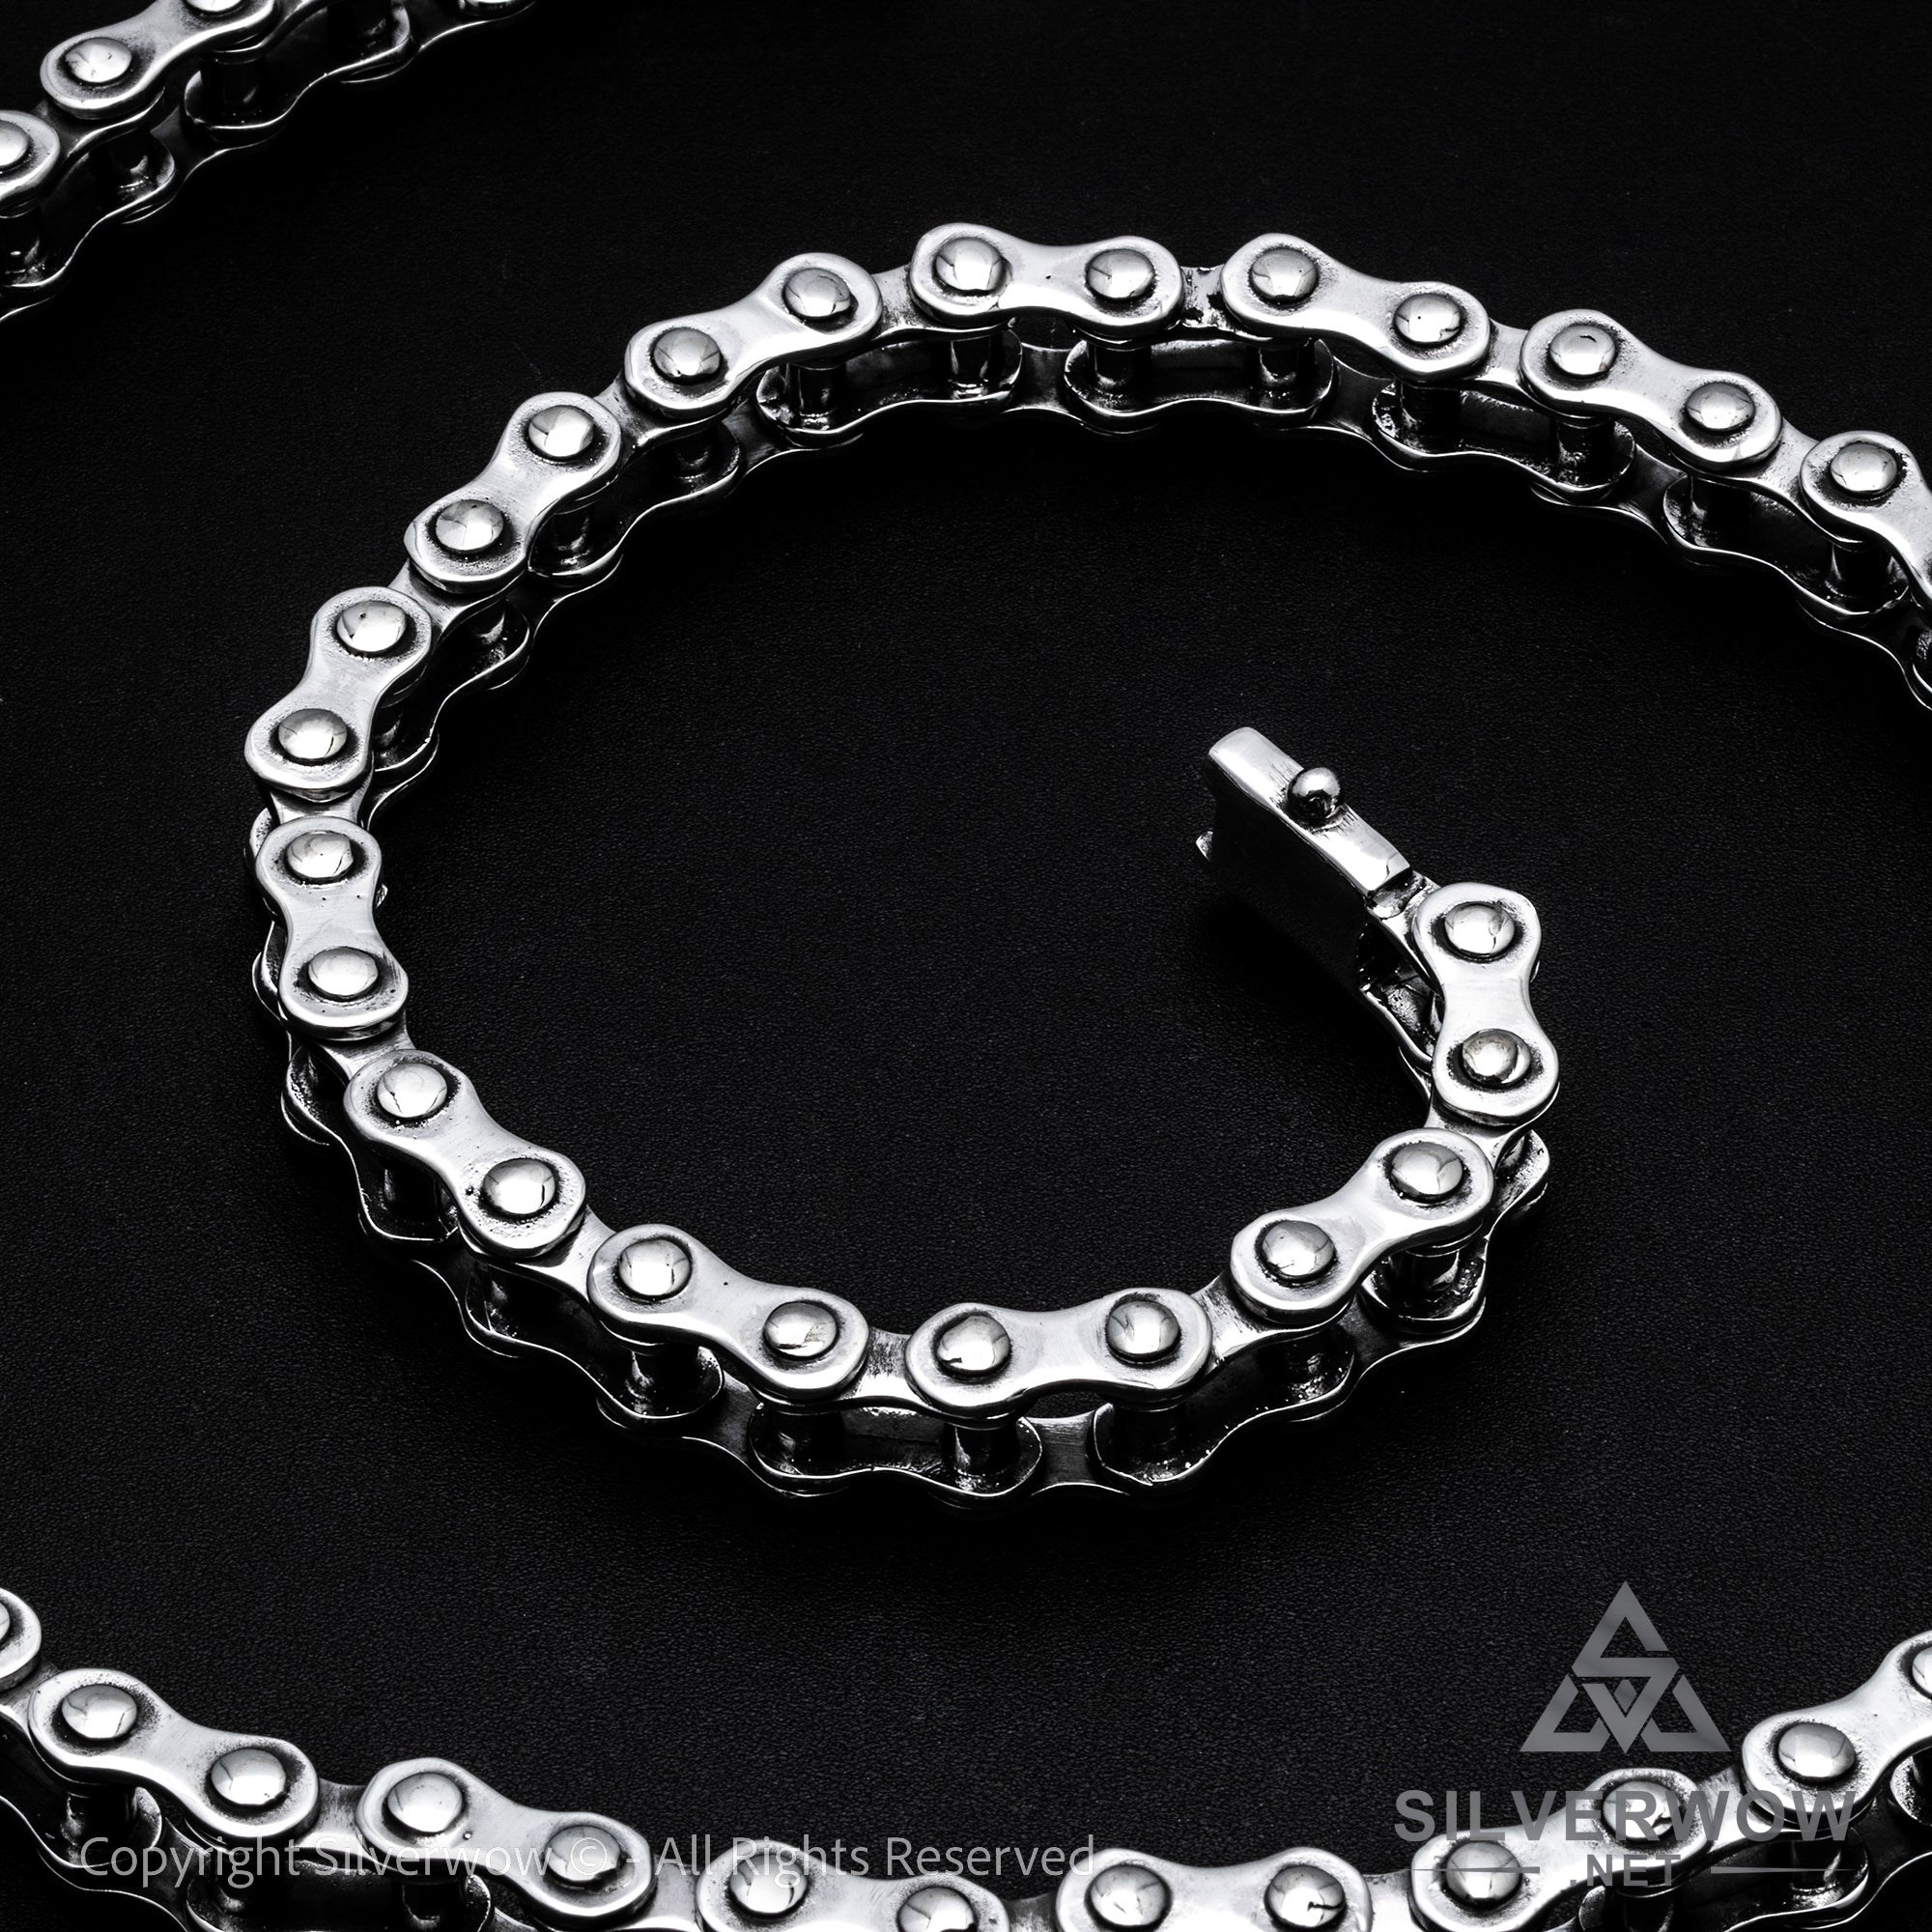 Buy COOLSTEELANDBEYOND Men Heavy Sturdy Bike Chain Motorcycle Chain Bracelet  of Stainless Steel, Silver Color Polished at Amazon.in